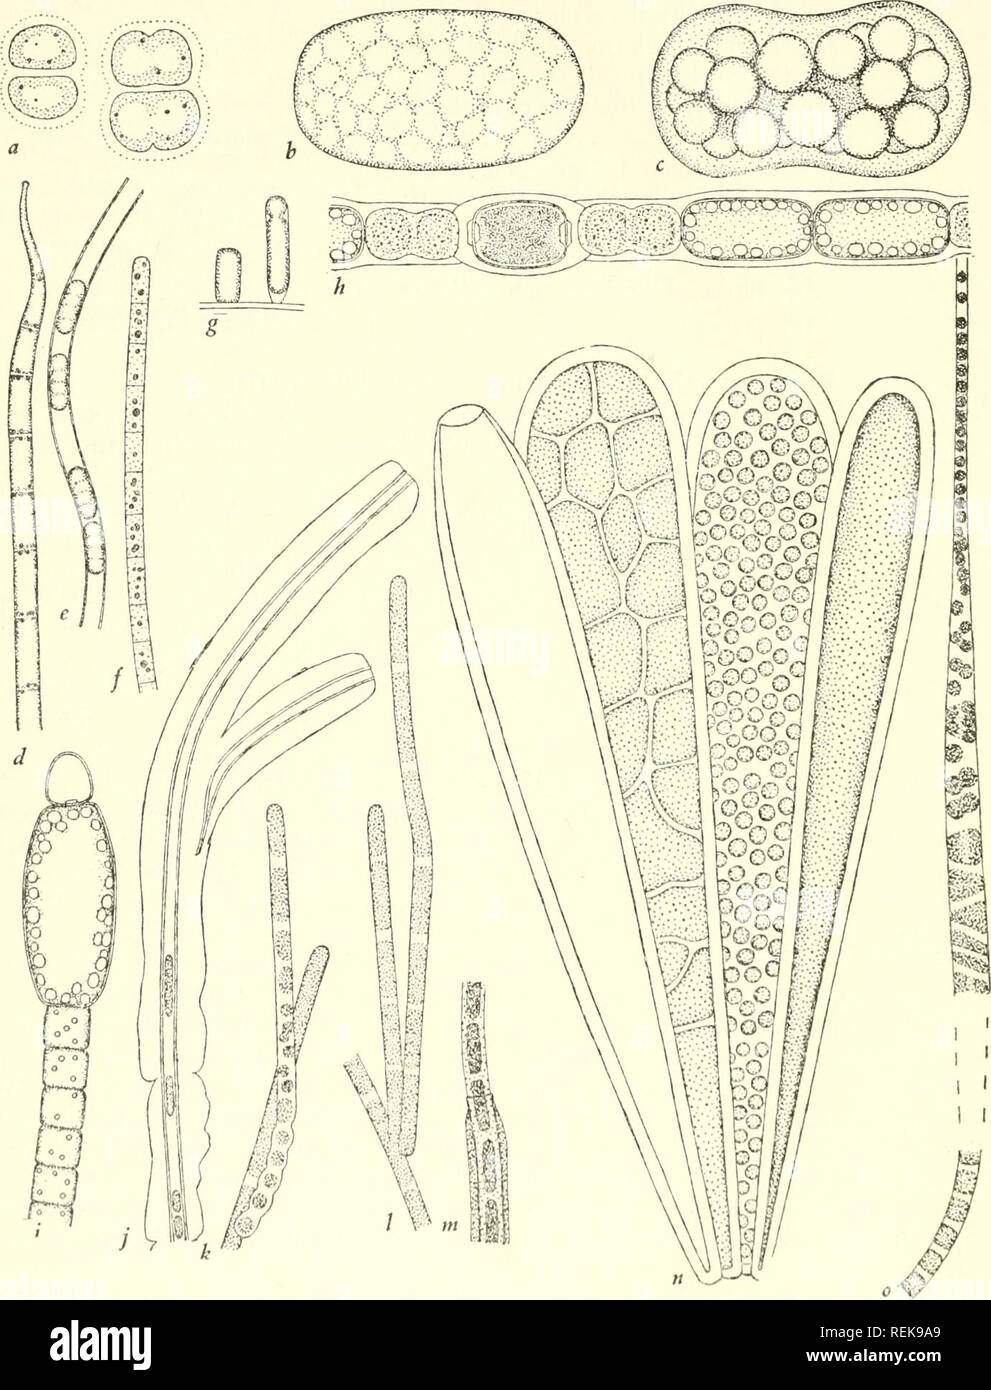 . The classification of lower organisms. Biology. 32] The Classification of Lower Organisms. Fig. 4.—Coccogonea: a, Chroococcus sp.; b, C, Achromatiuni oxalijerum. Gloio- phycea: d, Oscillatoria splendida; e, Phormidium sp.; f, Beggiatoa sp.; g, Chamae- siphon incrustans; h, Anabaena inacqualis; , Cylidrospcrmum majus; j, Chlarnydo- thrix ochracea; k, 1, m, Clonothrix fusca after Kolk (1938); n, Dermocarpa protea after Setchell and Gardner (1919); o, Crenothrix polyspora after Kolk (1938). All X 1,000.. Please note that these images are extracted from scanned page images that may have been di Stock Photo